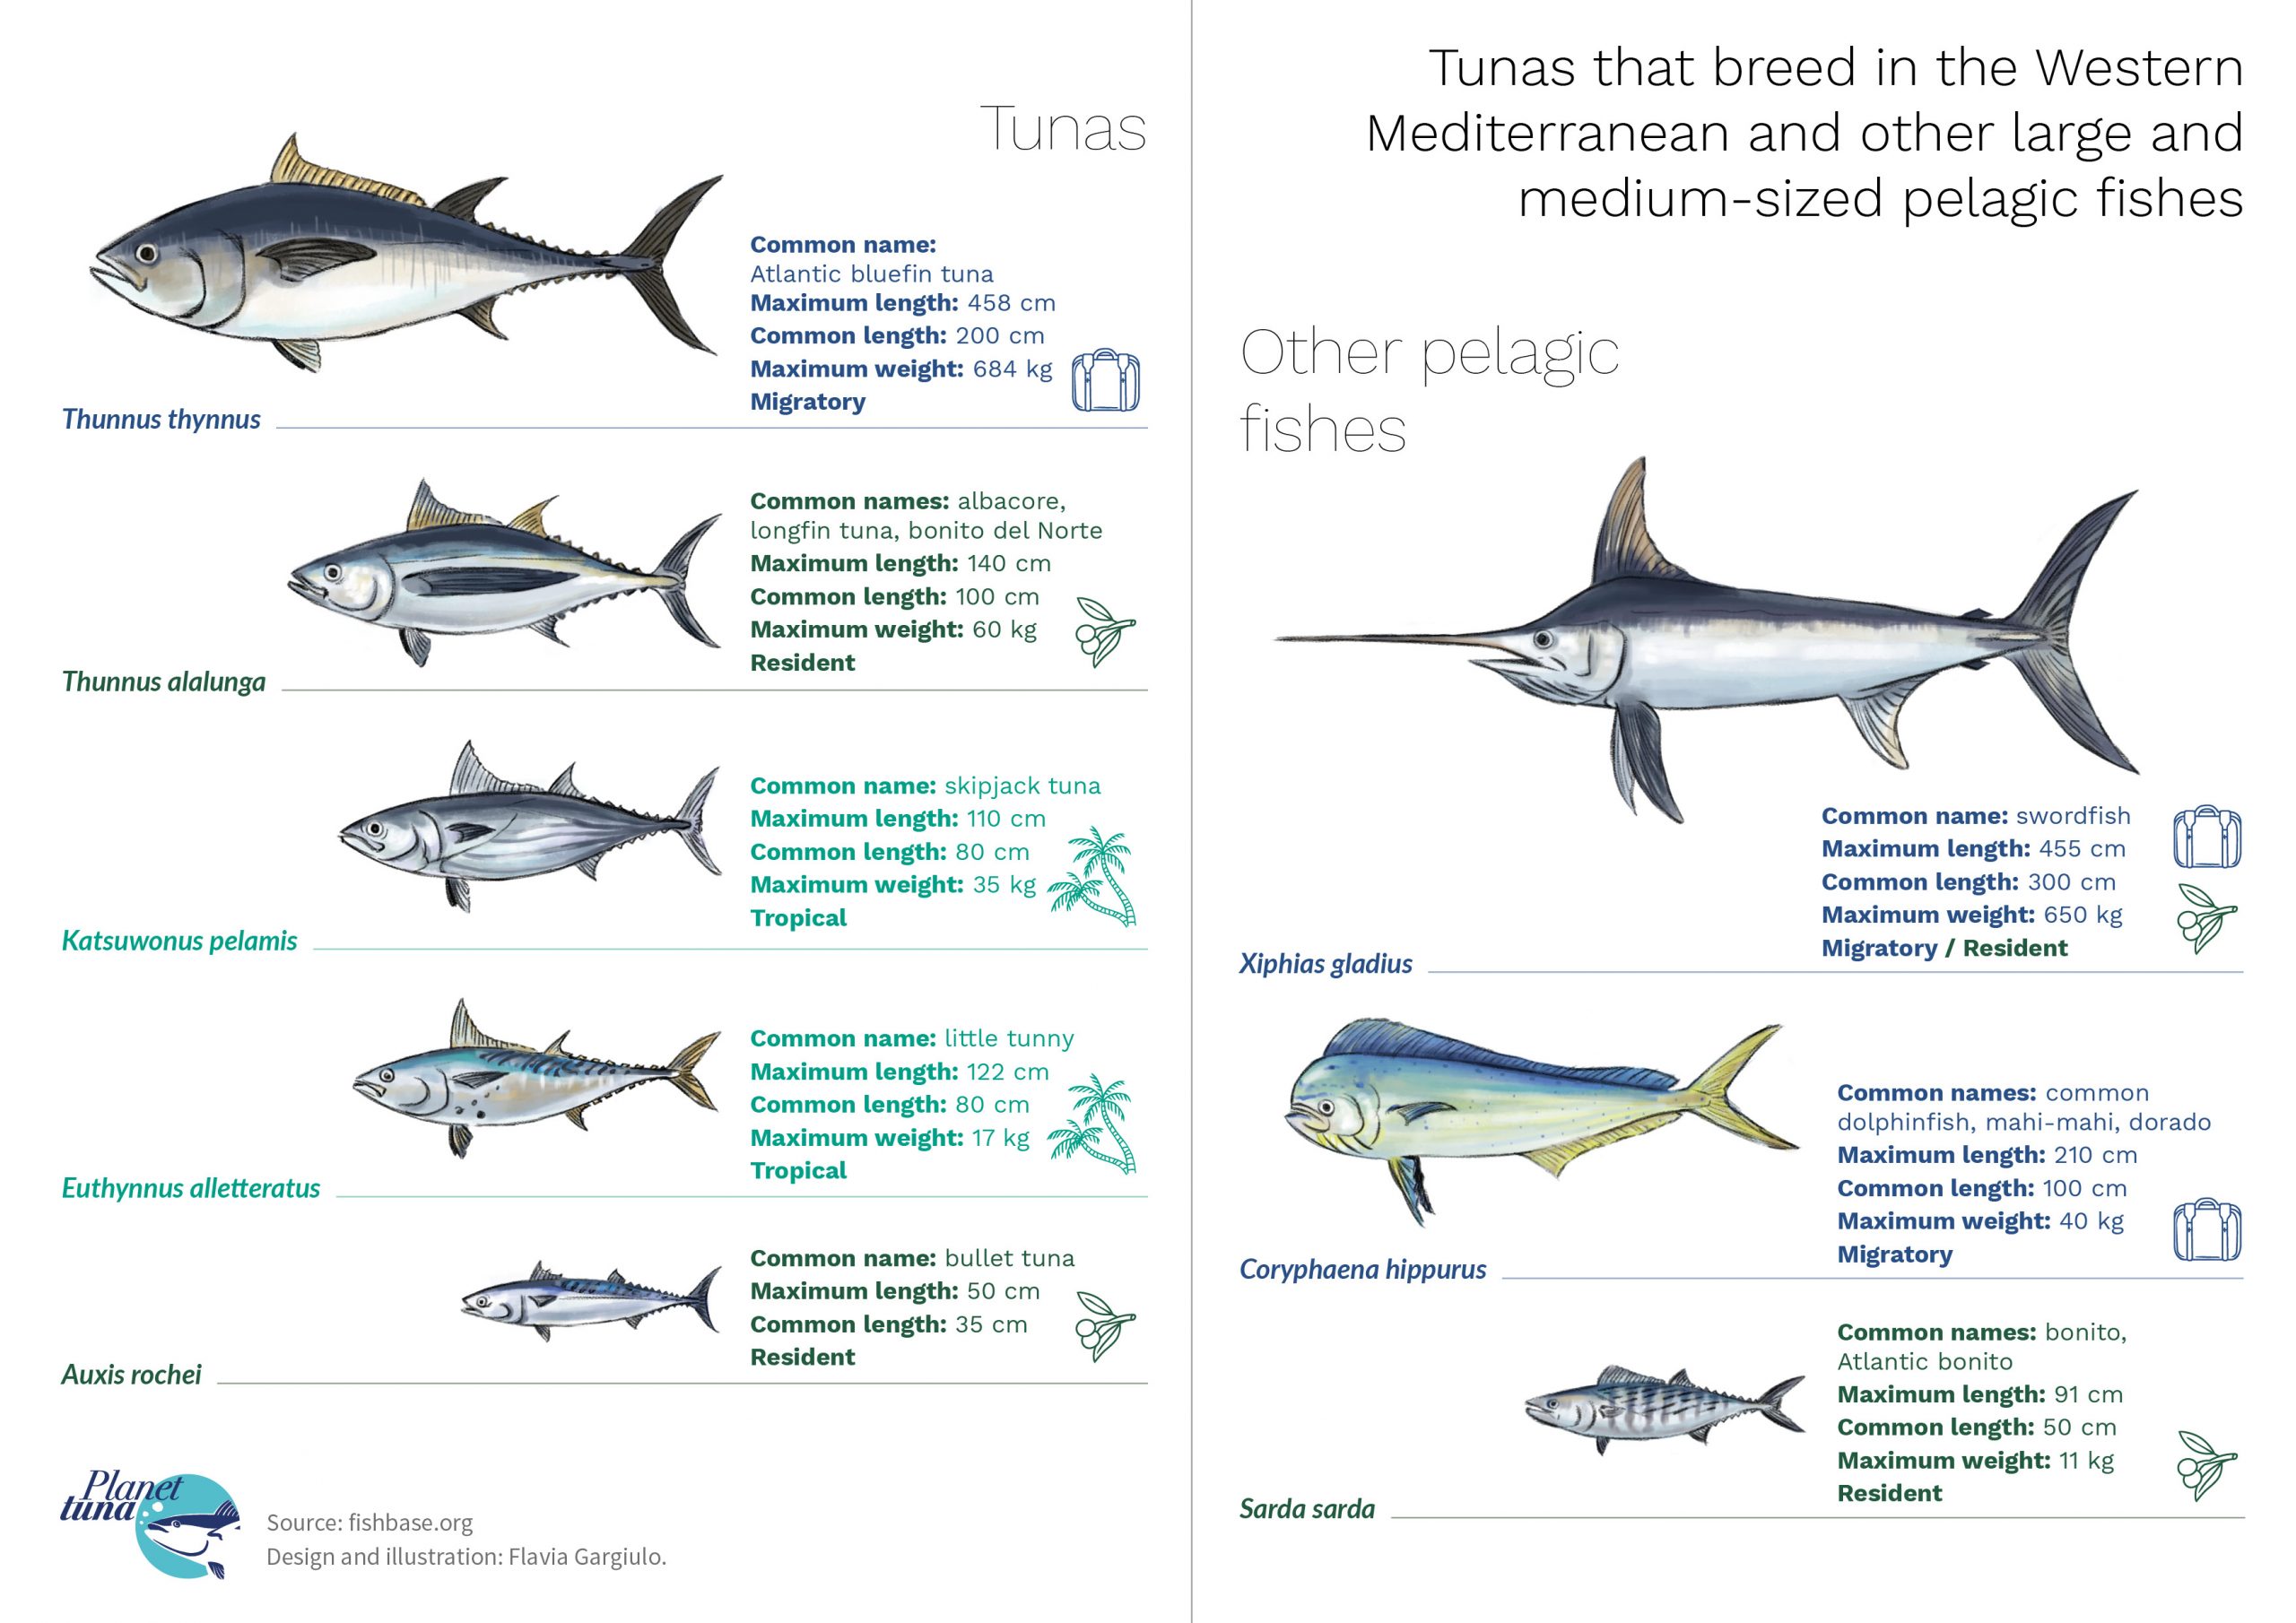 Infographics about the more iconic tunas and other large pelagic that breed in the Mediterranean